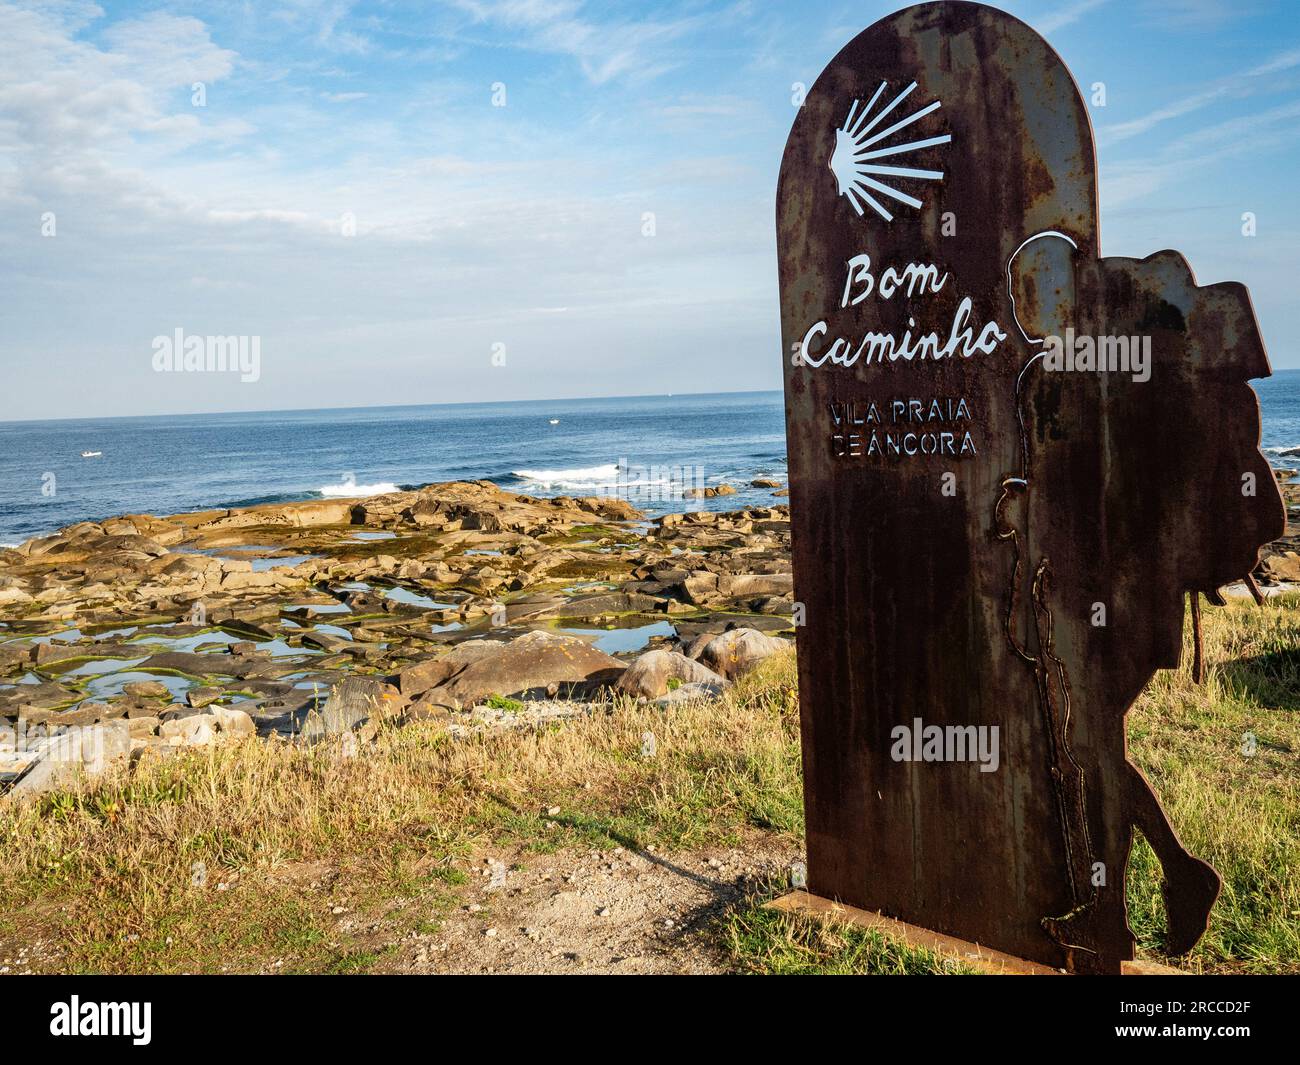 June 11, 2023, Vila Praia de Ancora, Viana do Castelo, Portugal: A mark with the shape of a pilgrim is seen wishing a good trip to the pilgrims. The Coastal Route of the Portuguese Camino is a beautiful alternative walk to the Central Route. The total distance of the route is 280 km. It starts in Porto and follows the coast till Redondela in Spain where it merges with the Central Route. About 30% of pilgrims who complete the Portuguese Camino walk the Coastal Way. The Portuguese Camino is getting more and more popular, and many pilgrims choose this route as an alternative to the Camino Frances Stock Photo